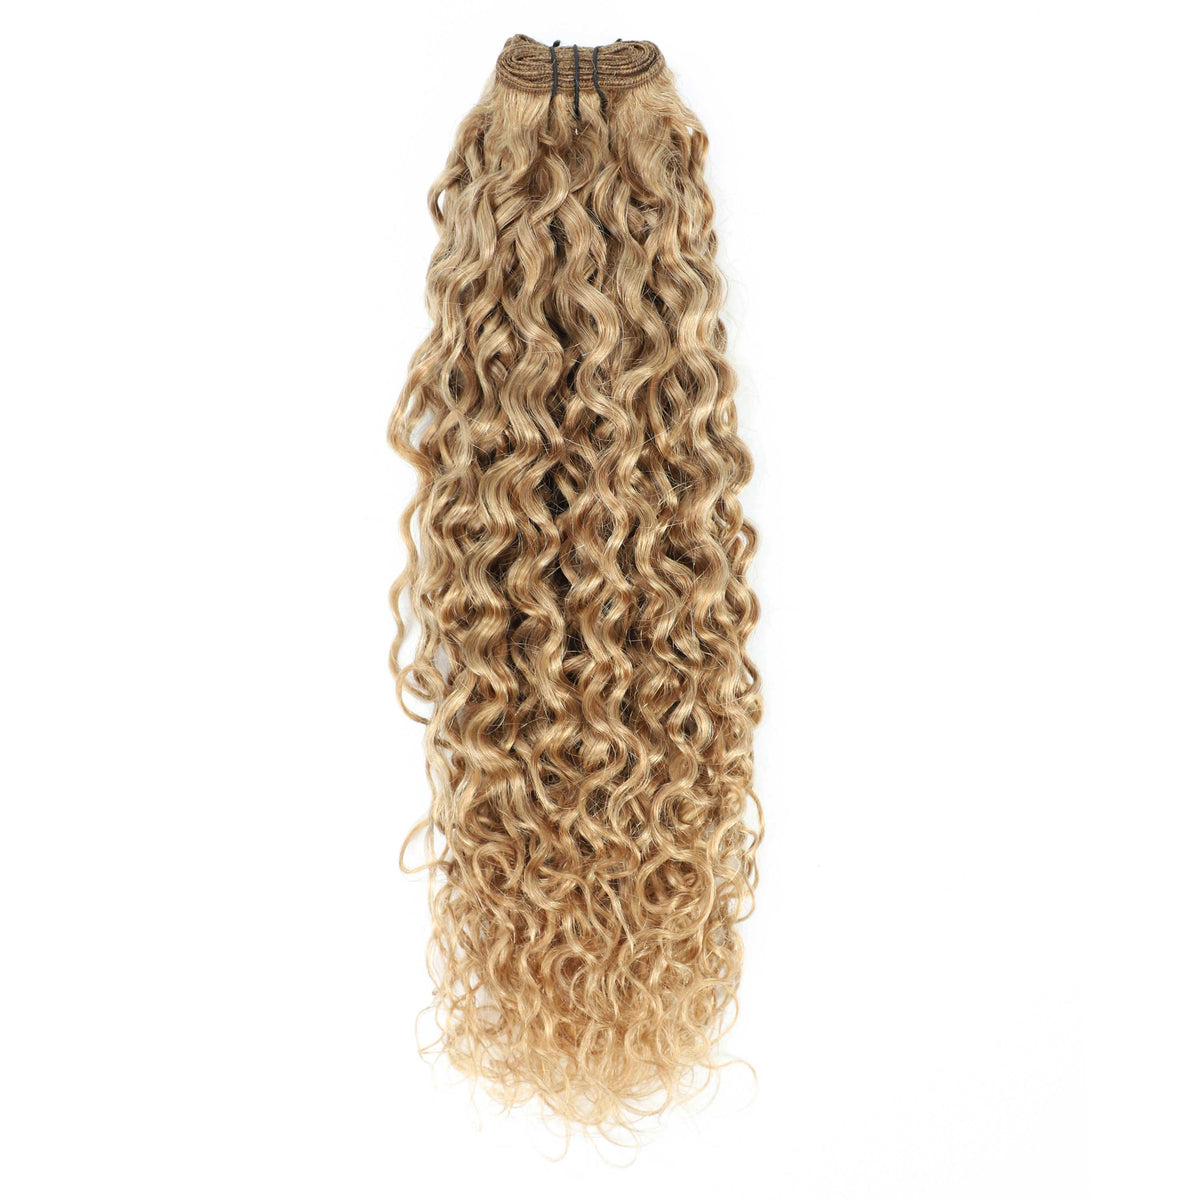 Weft Curly Hair Extensions 21" #16 Natural Blonde